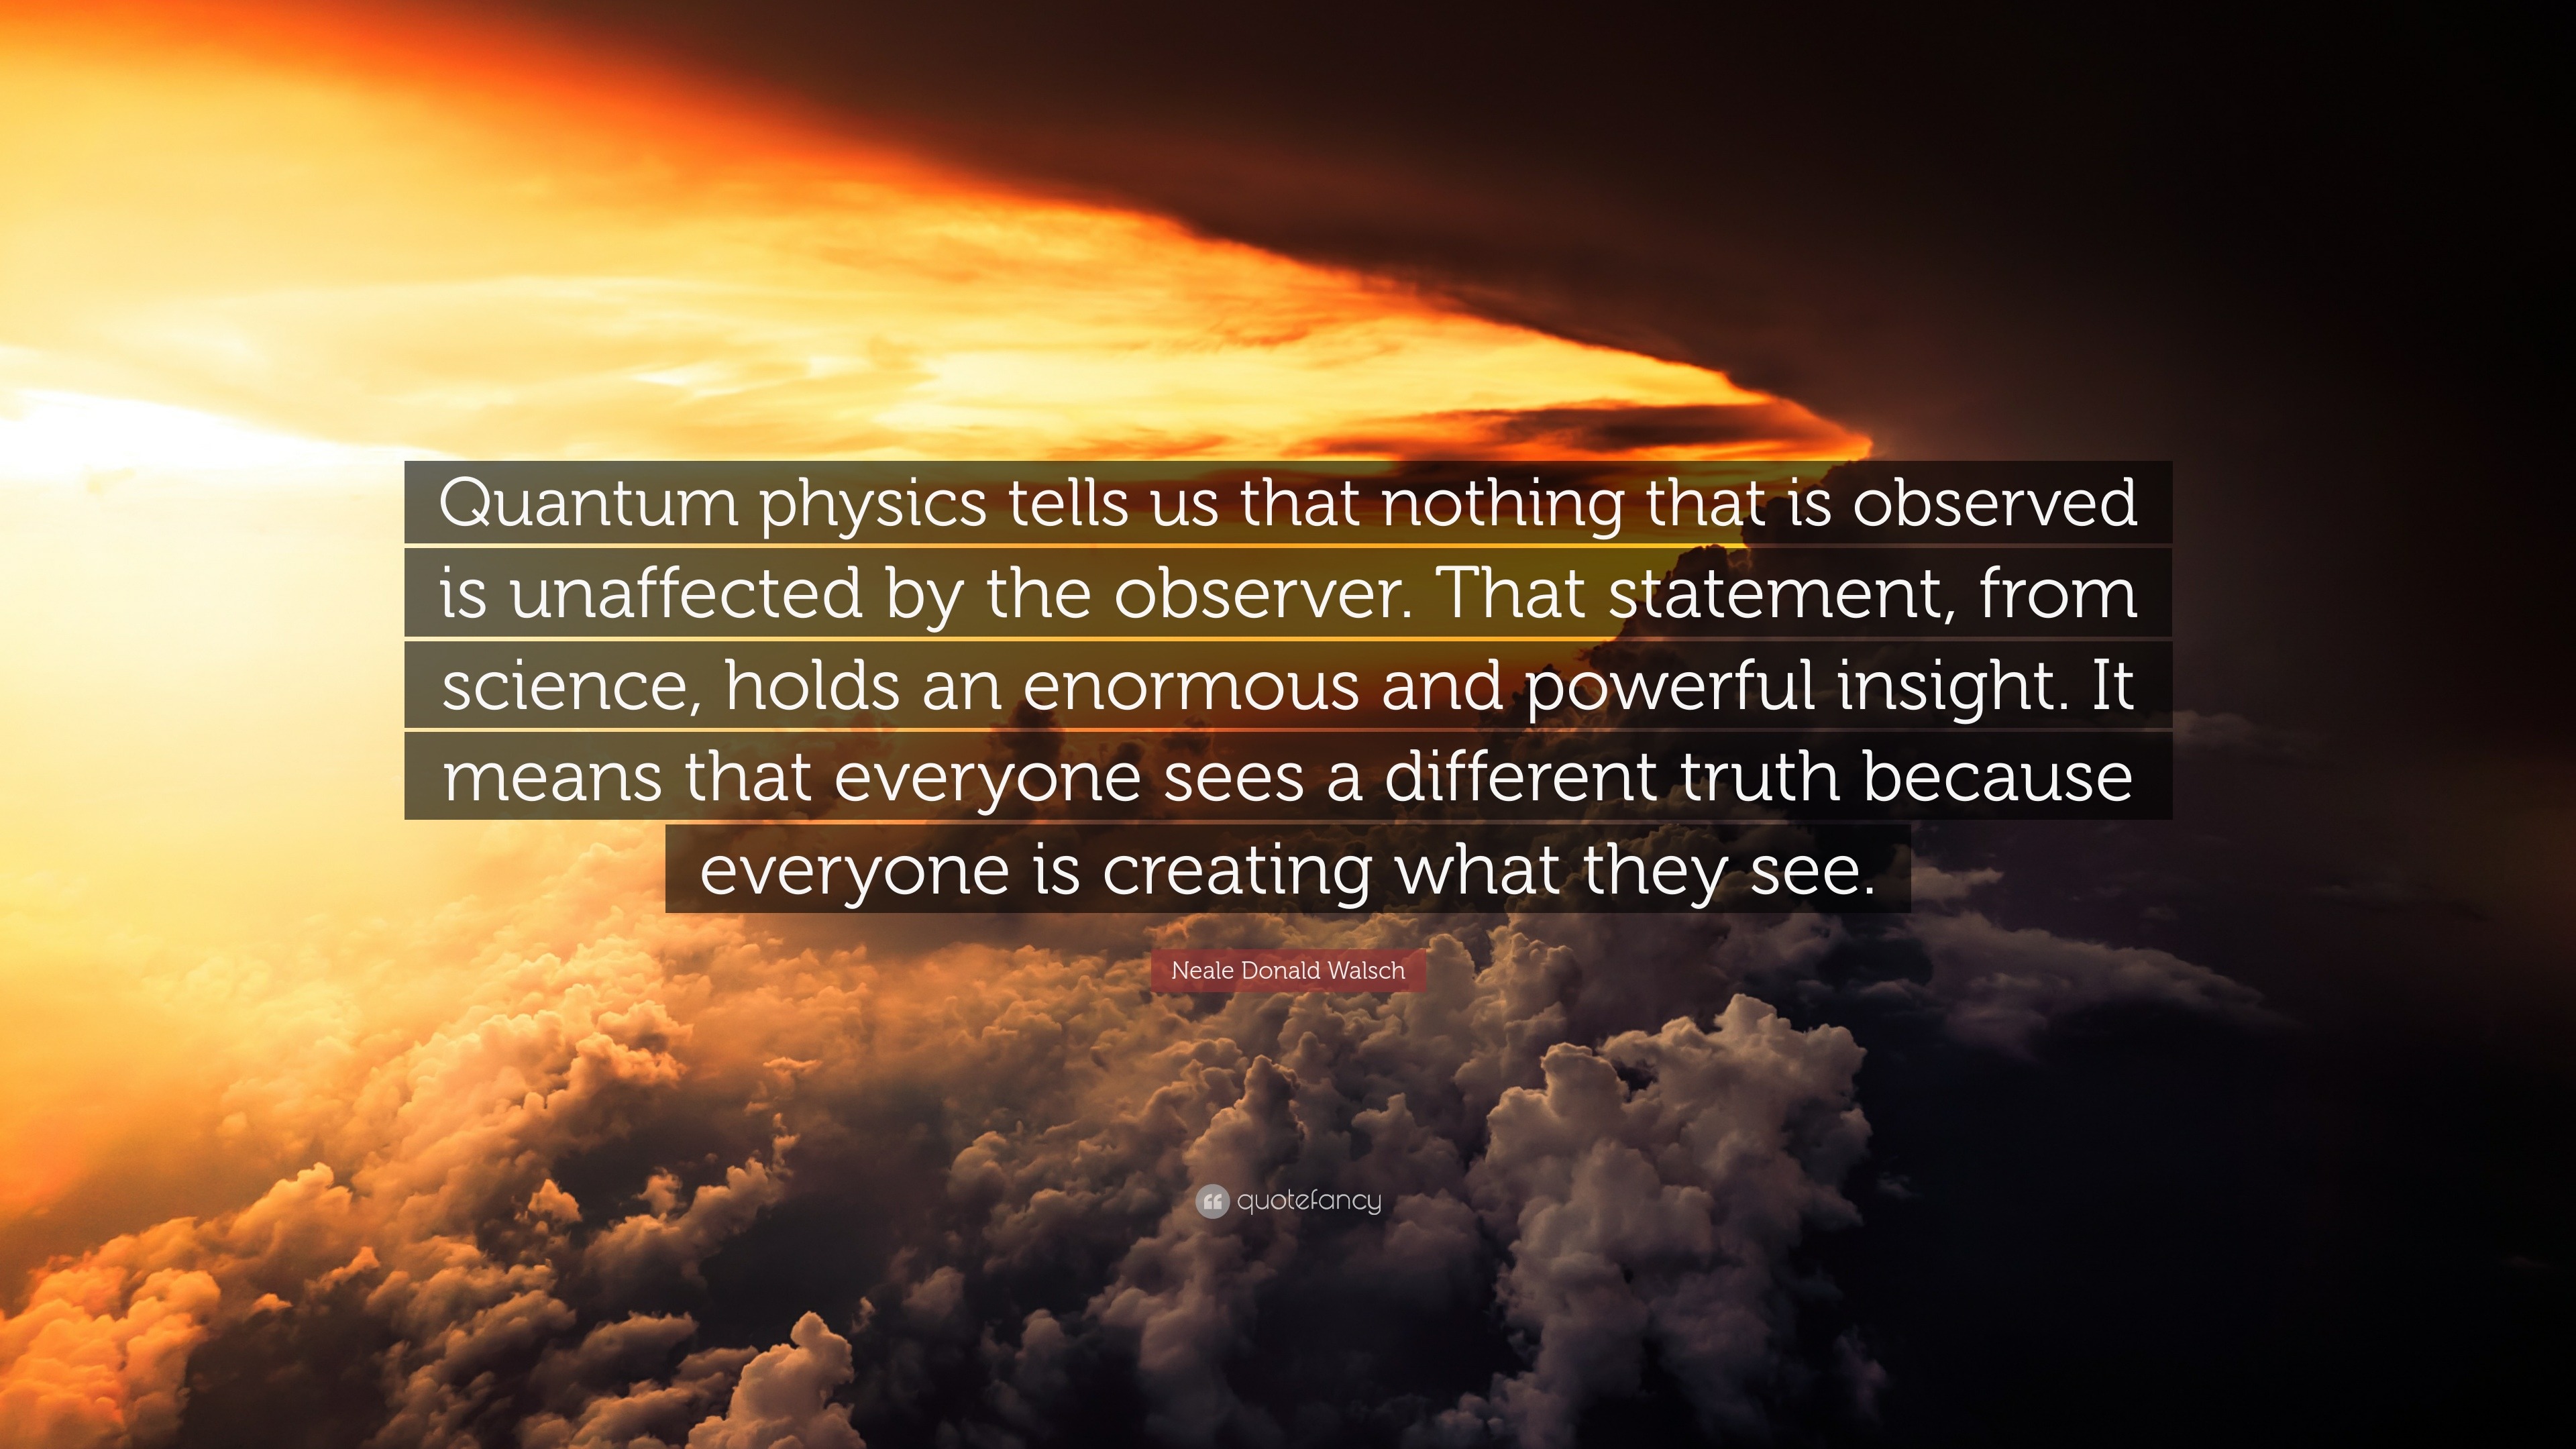 Neale Donald Walsch Quote: “Quantum physics tells us that nothing that